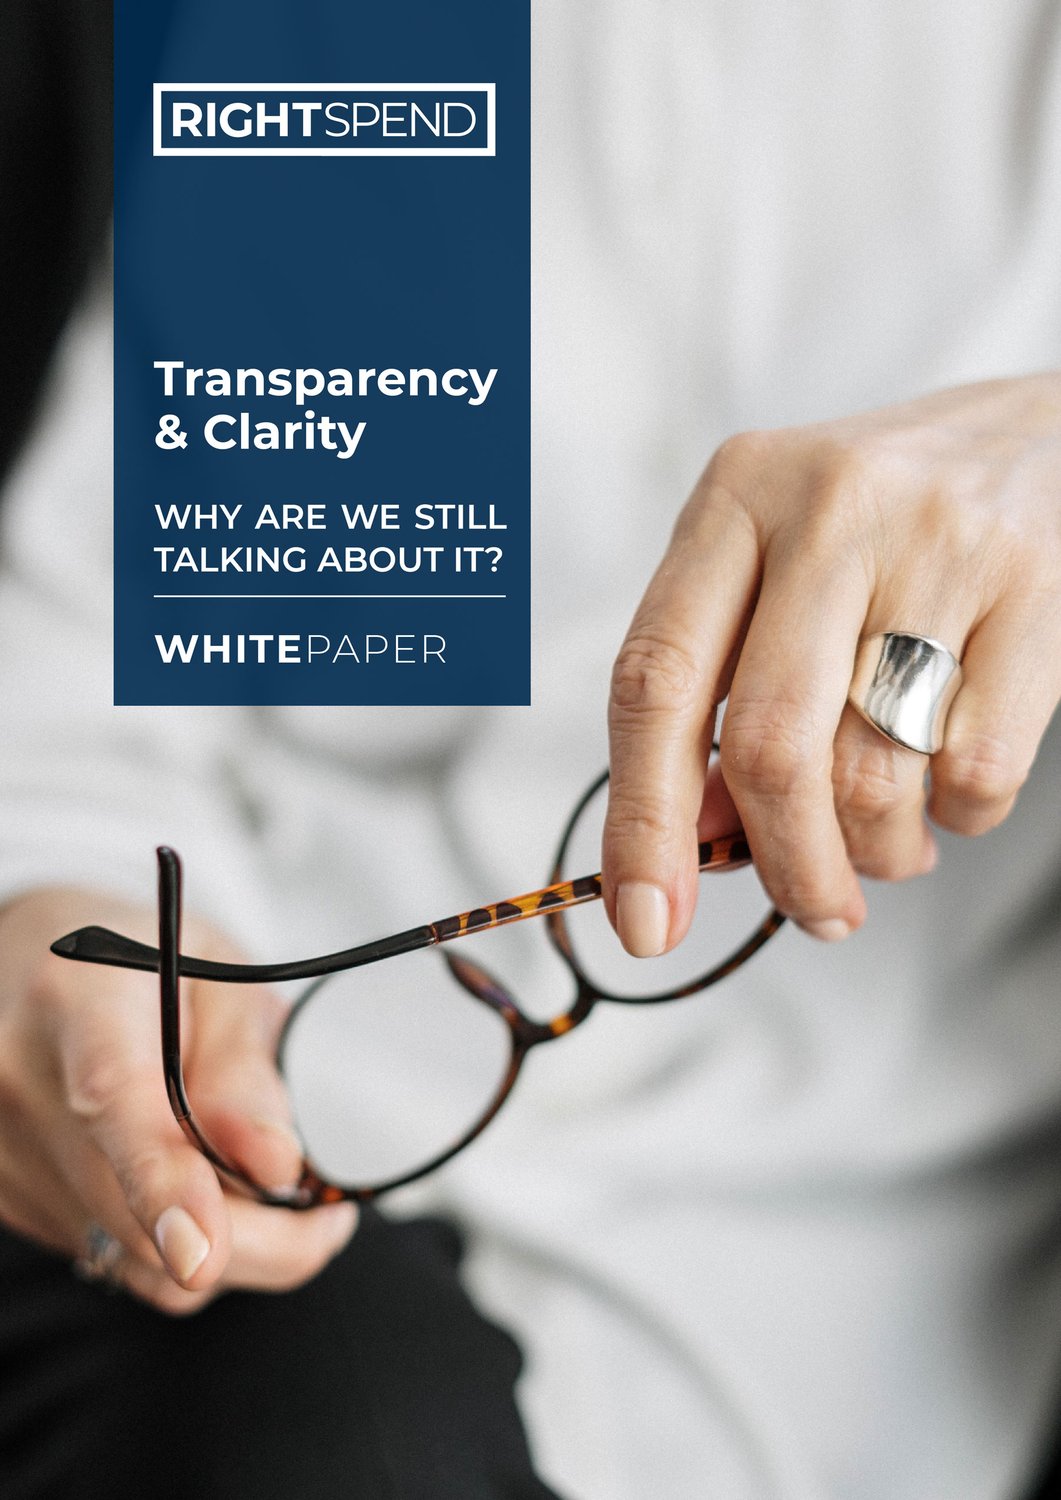 Transparency & Clarity A RightSpend Whitepaper